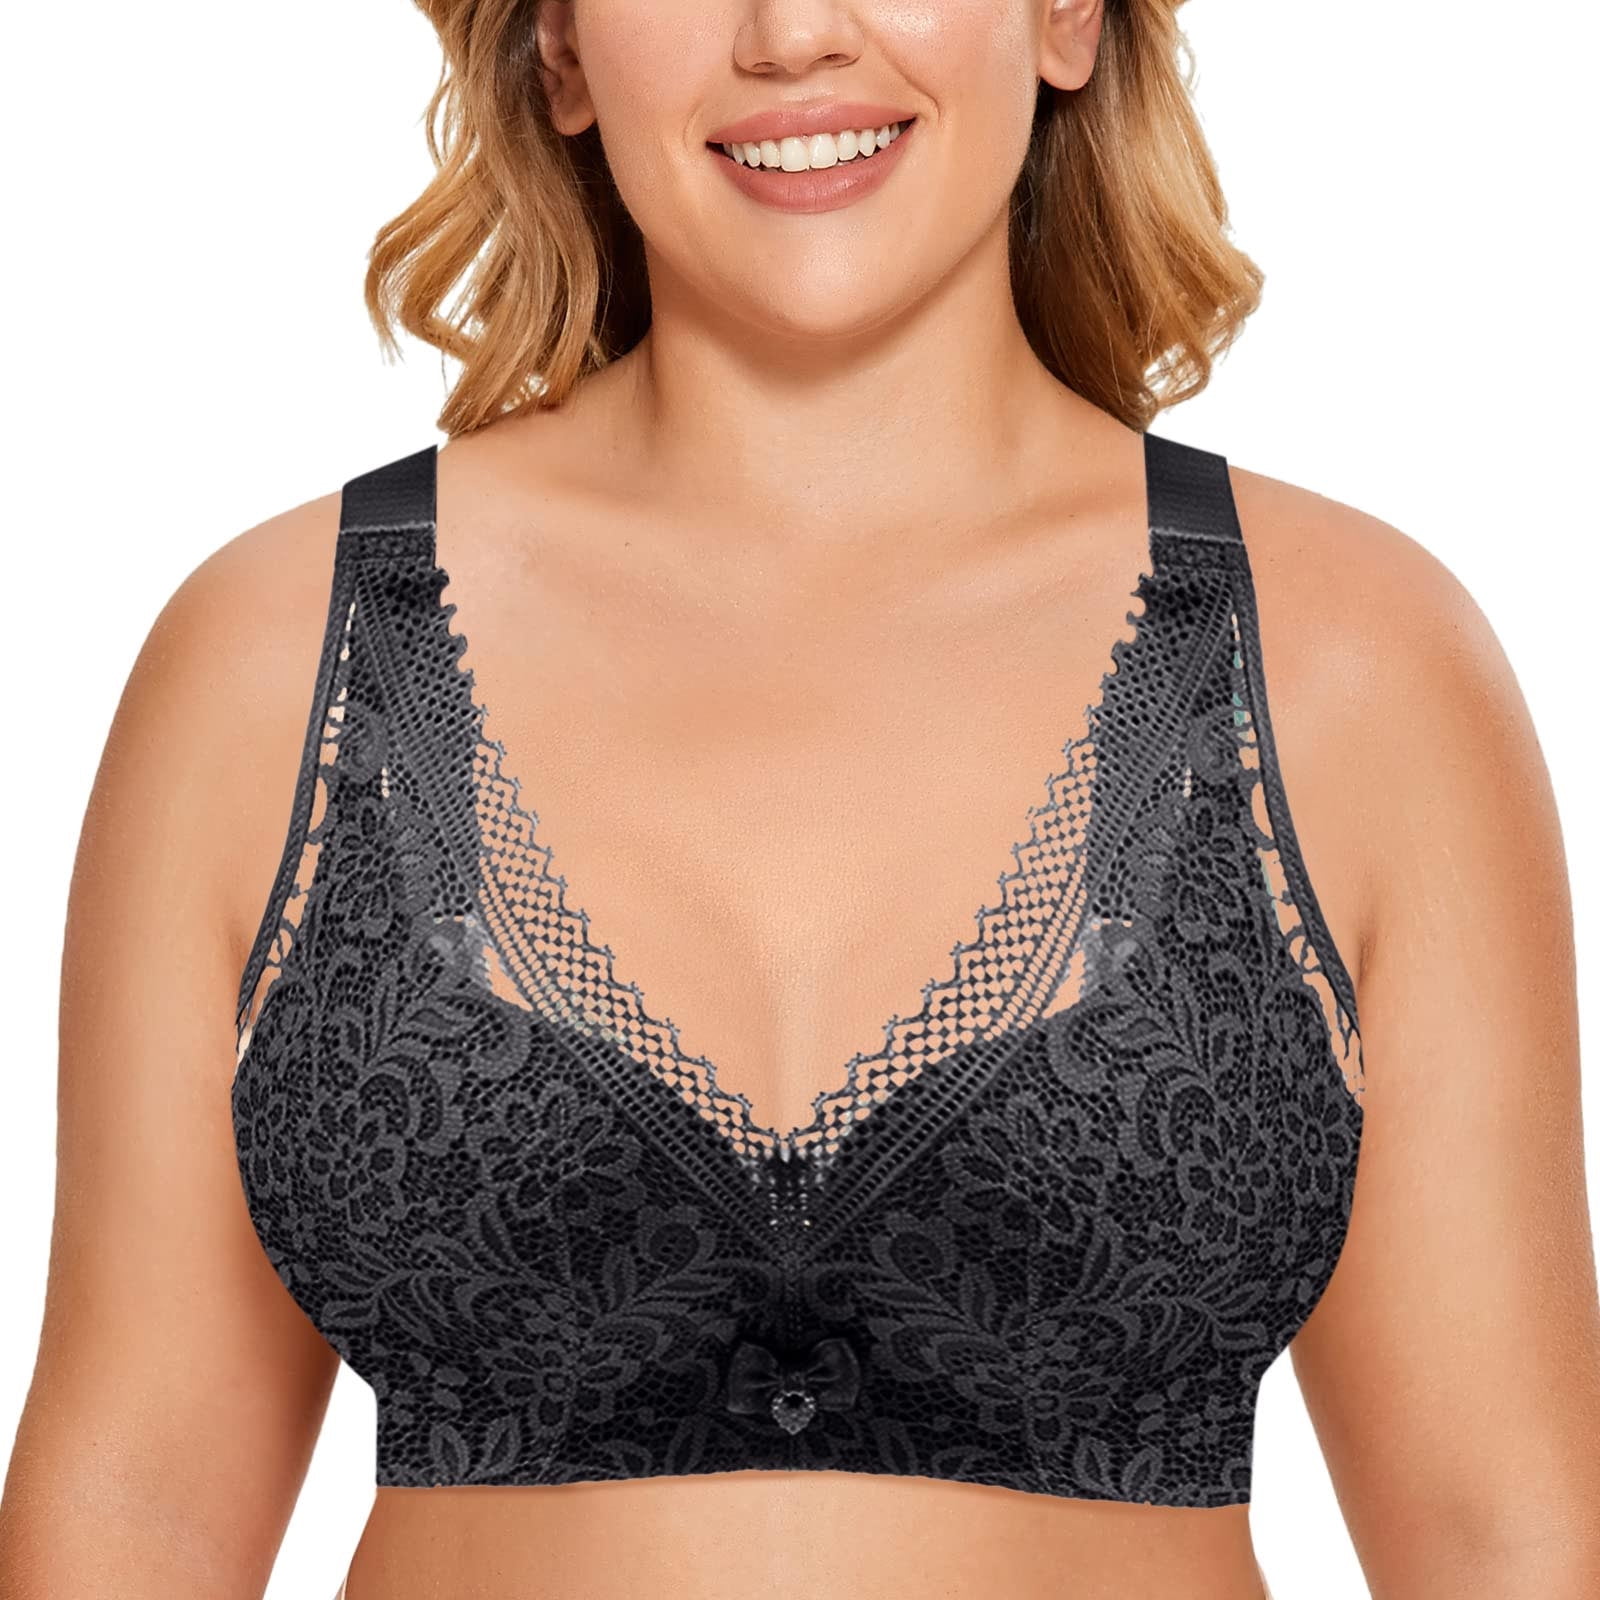 Size 42G Supportive Plus Size Bras For Women